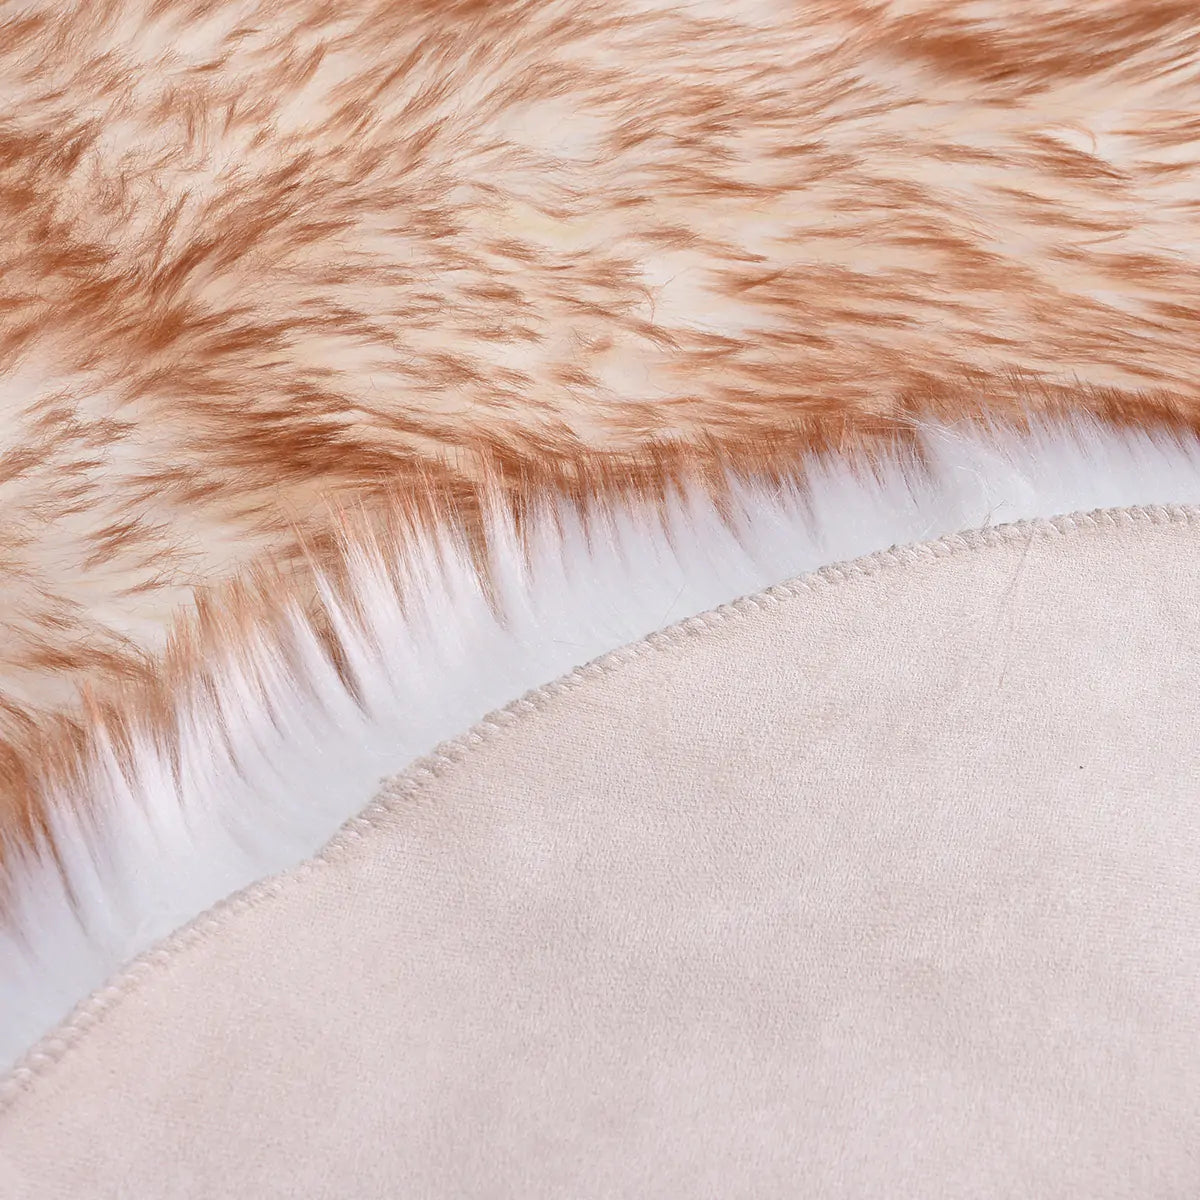 a close up of a furry animal skin